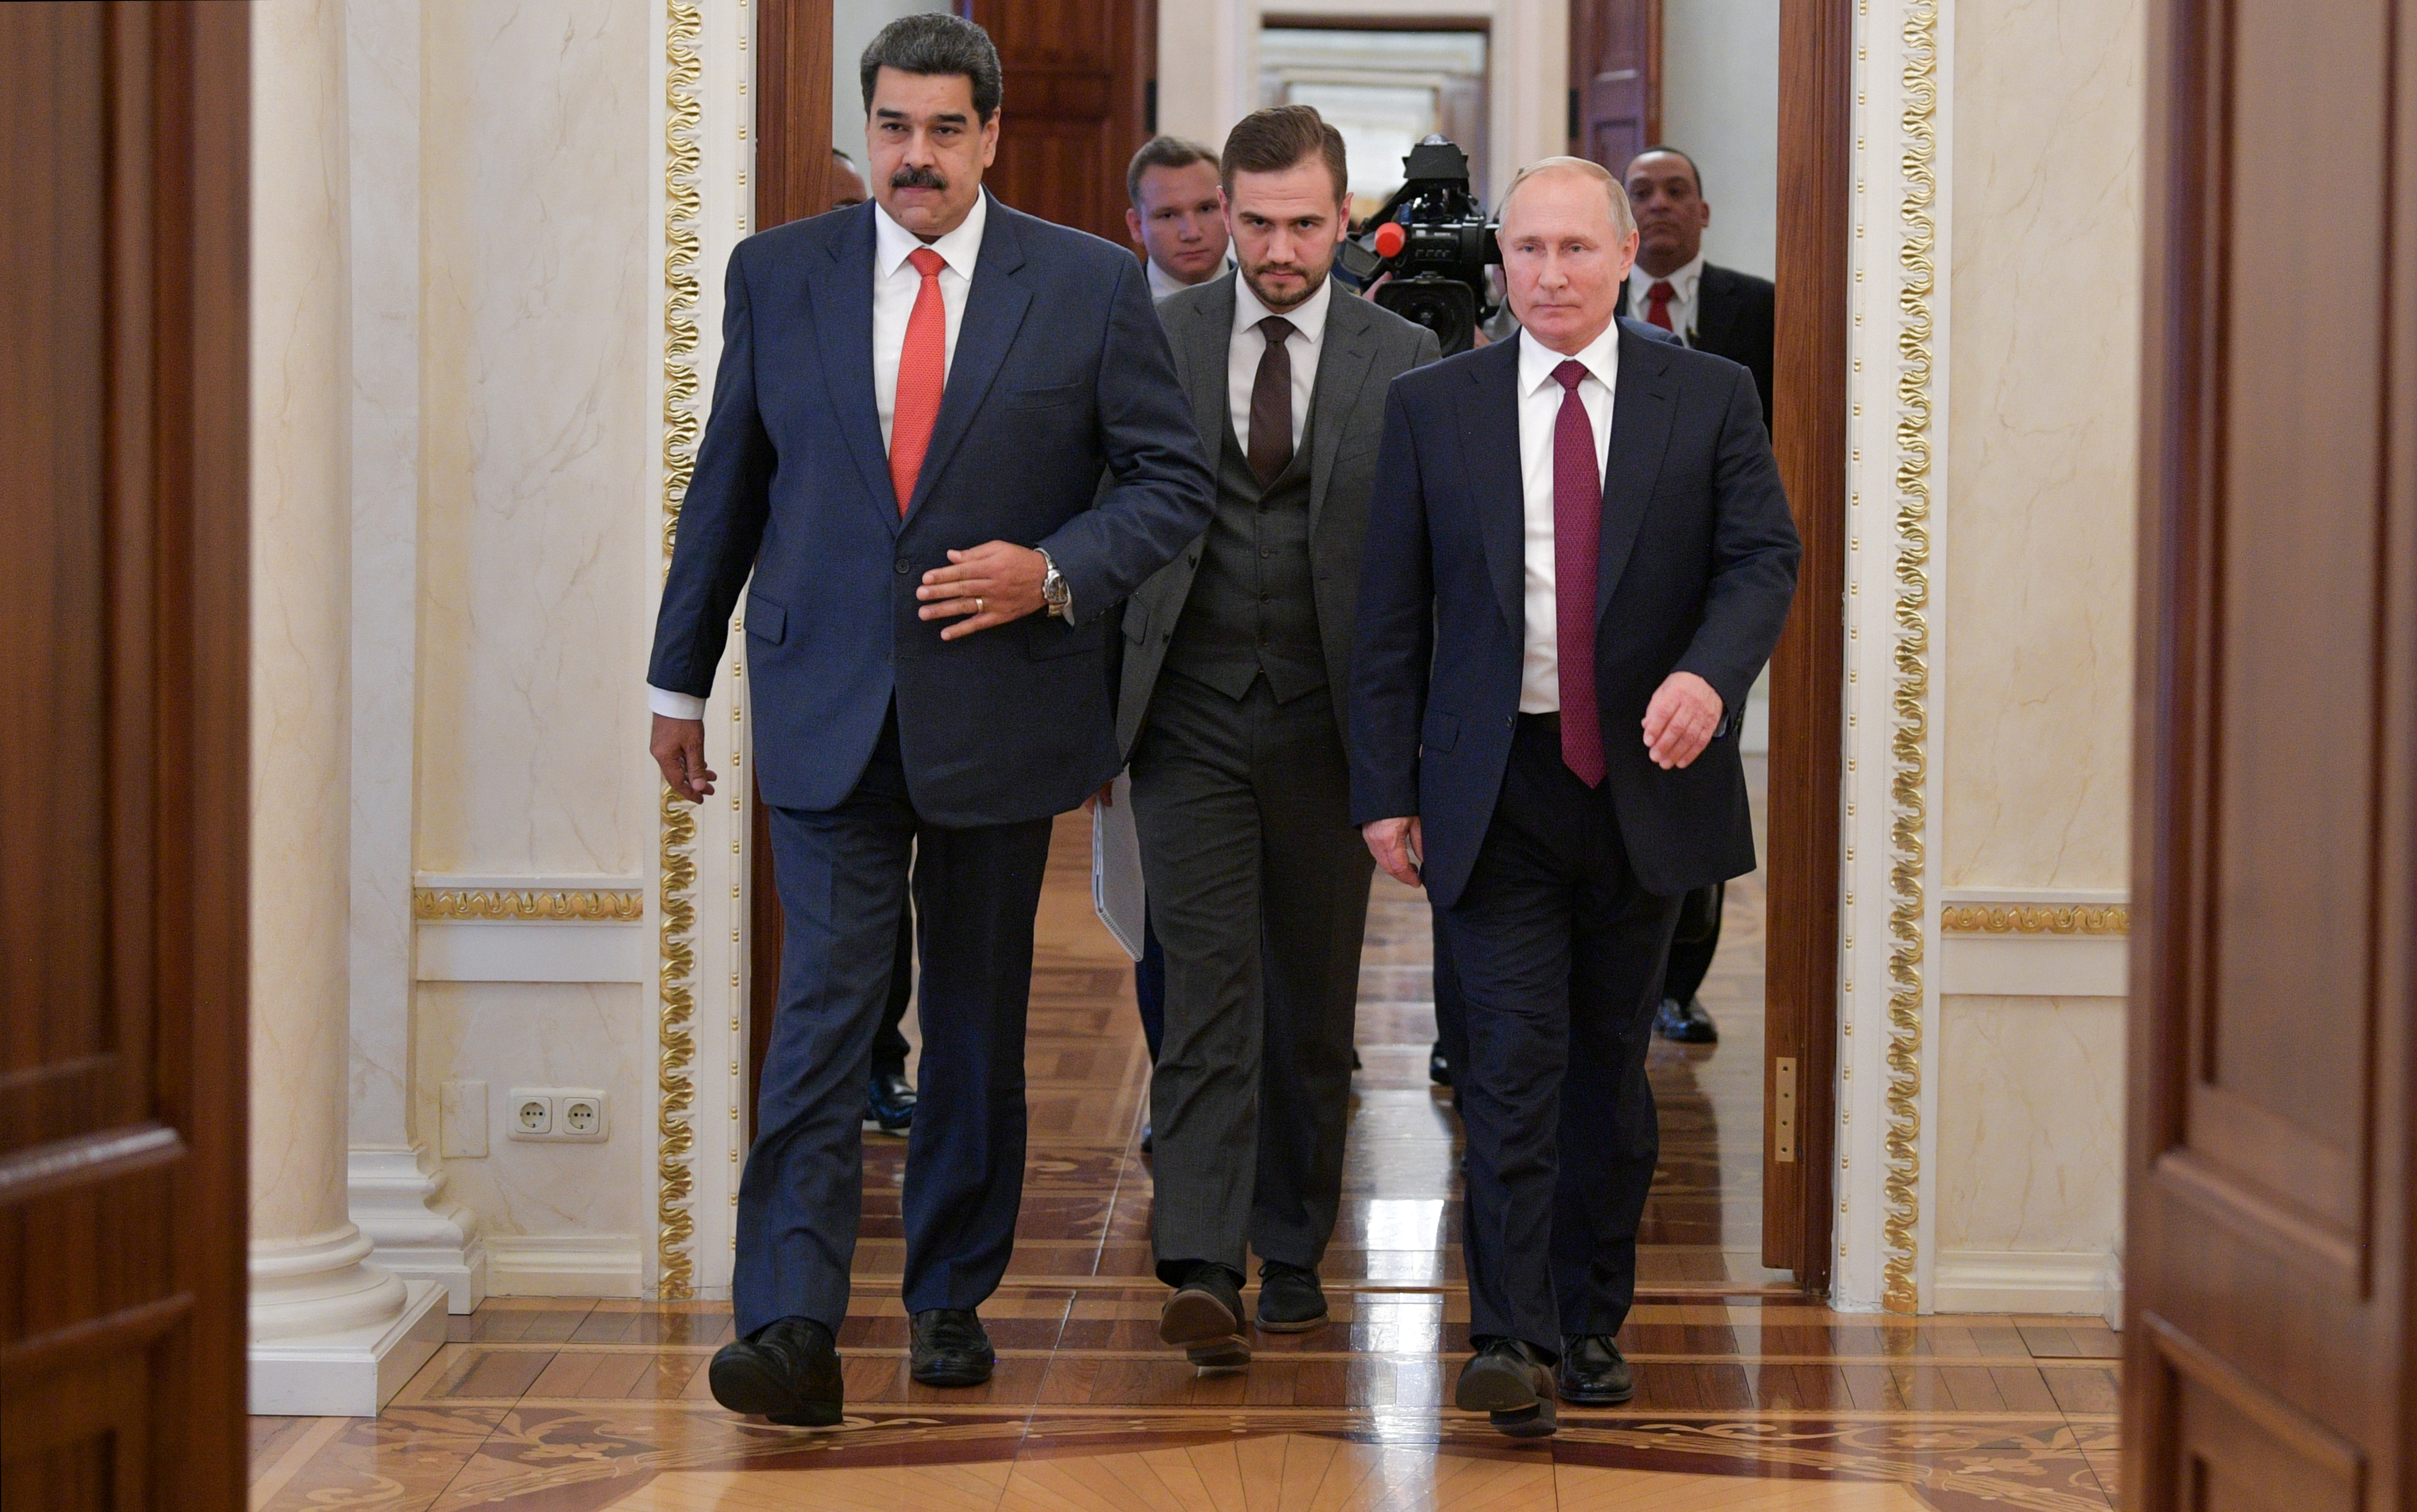 Russian President Putin meets with his Venezuelan counterpart Maduro in Moscow